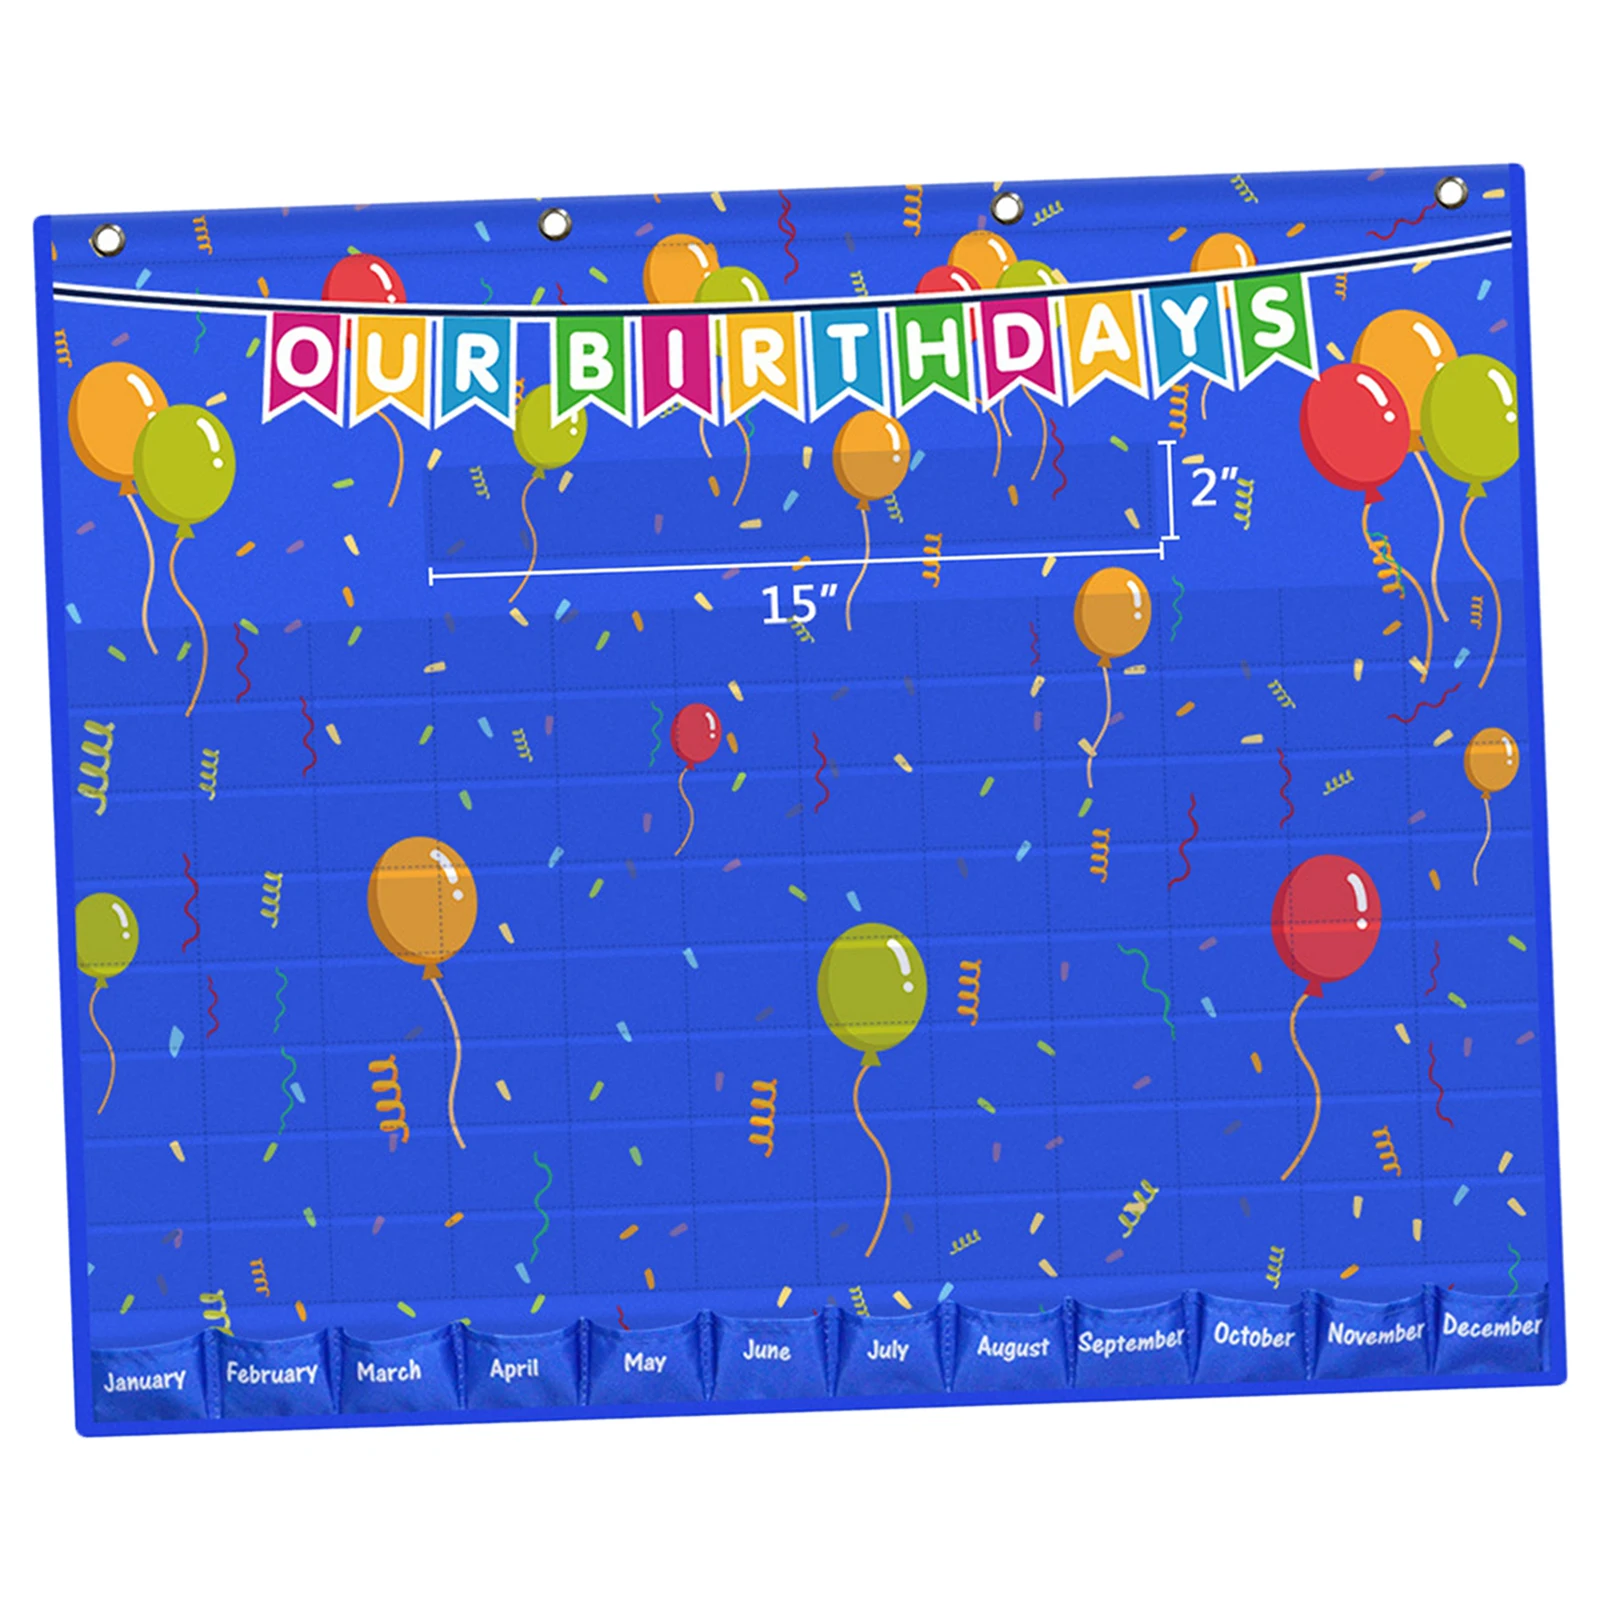 Our Birthday Celebration Graph Space-Saver Kids Pocket Chart for School Classroom